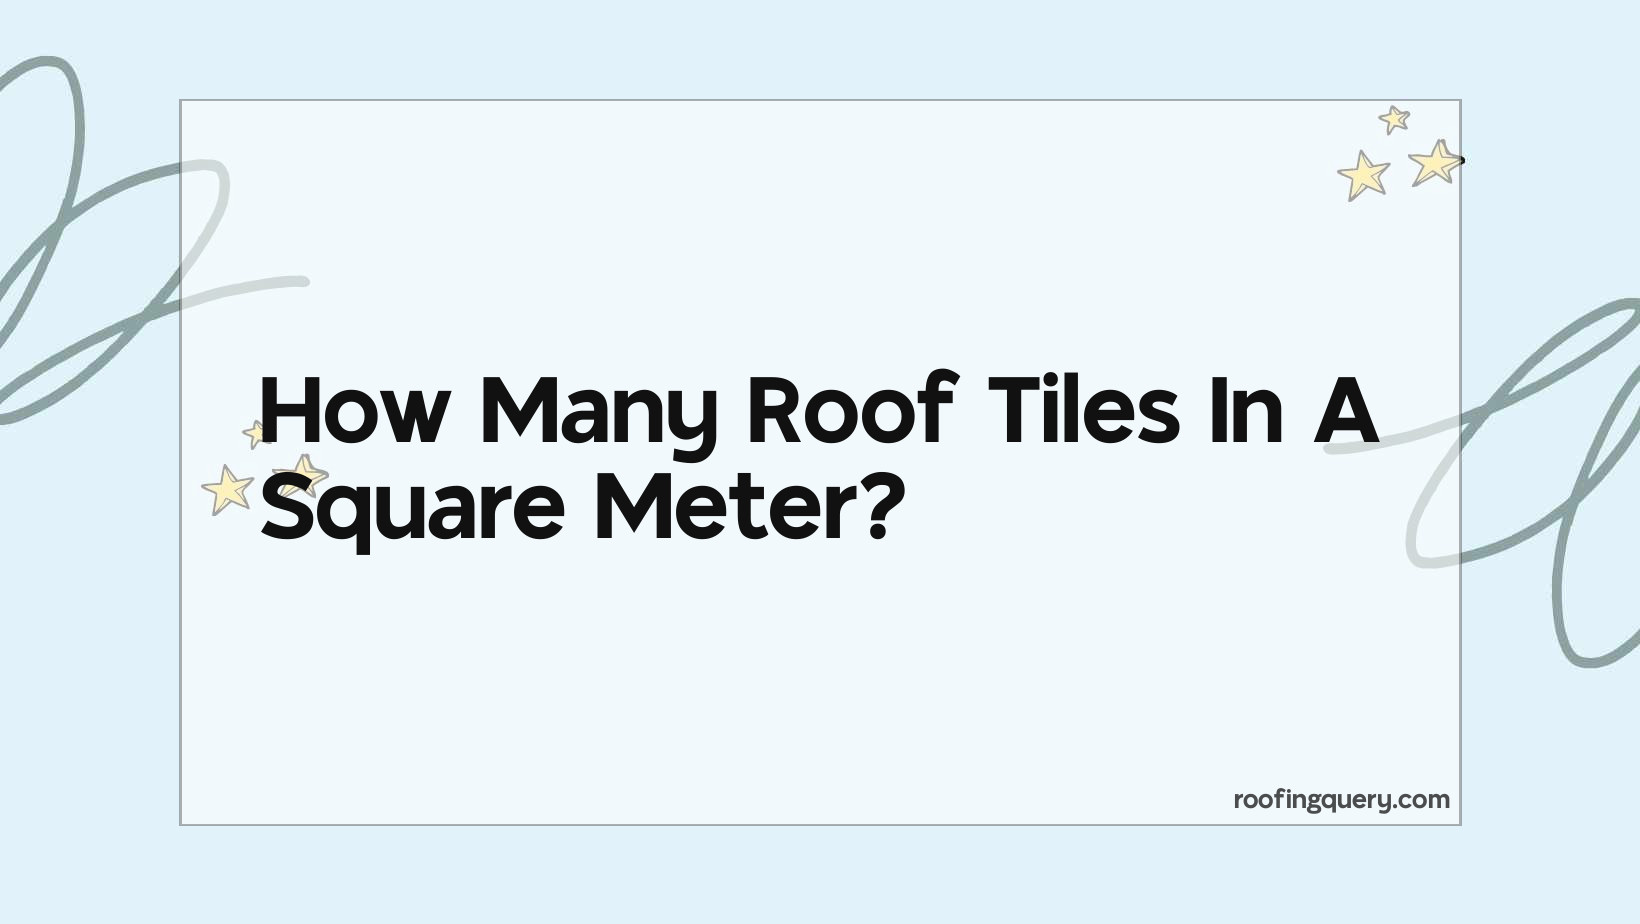 How Many Roof Tiles In A Square Meter?